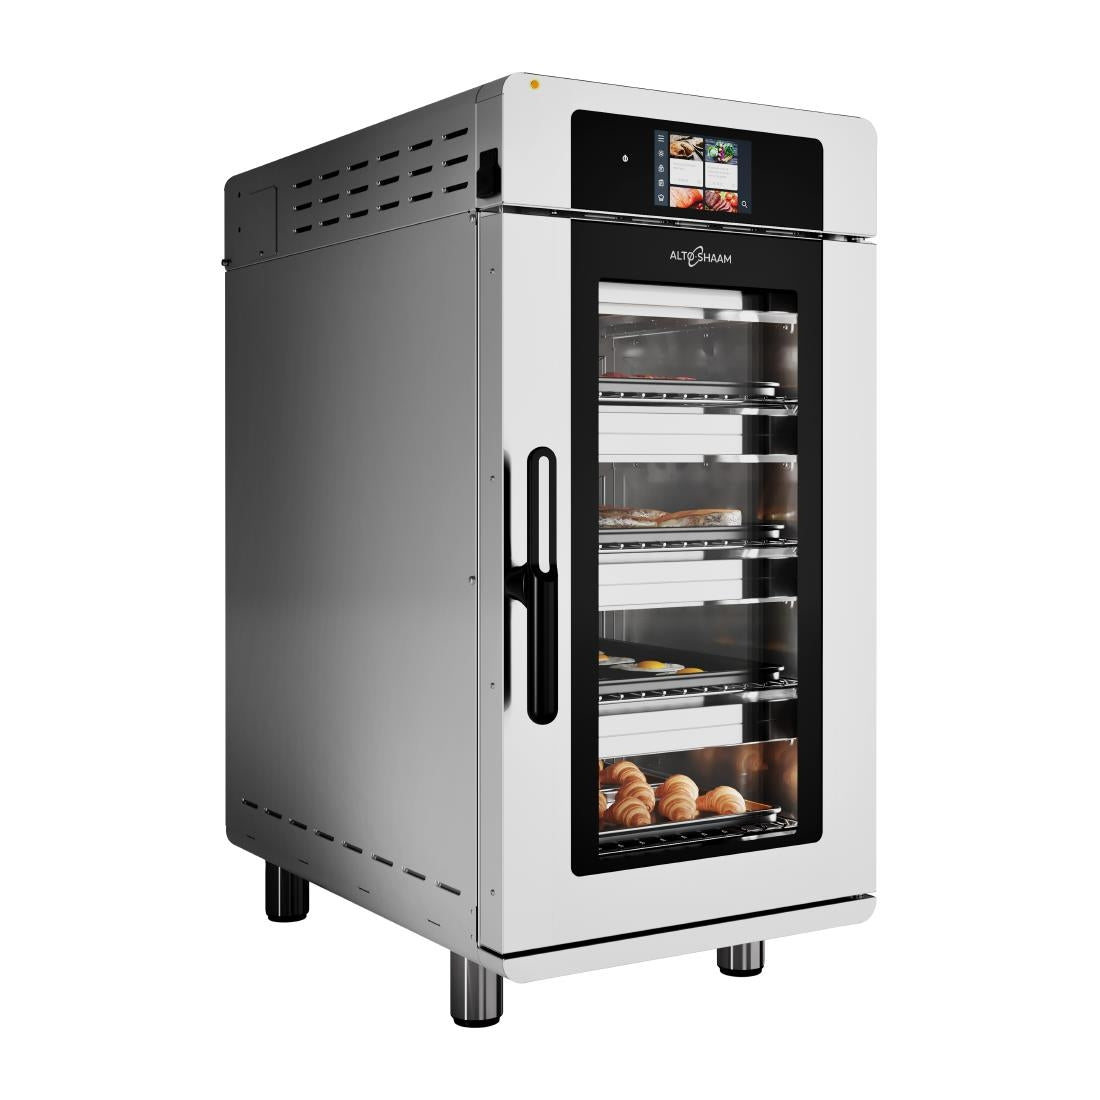 CX595 Alto-Shaam Deluxe Control VECTOR 4 Shelf Multi-Cook Oven VMC-H4H DX JD Catering Equipment Solutions Ltd